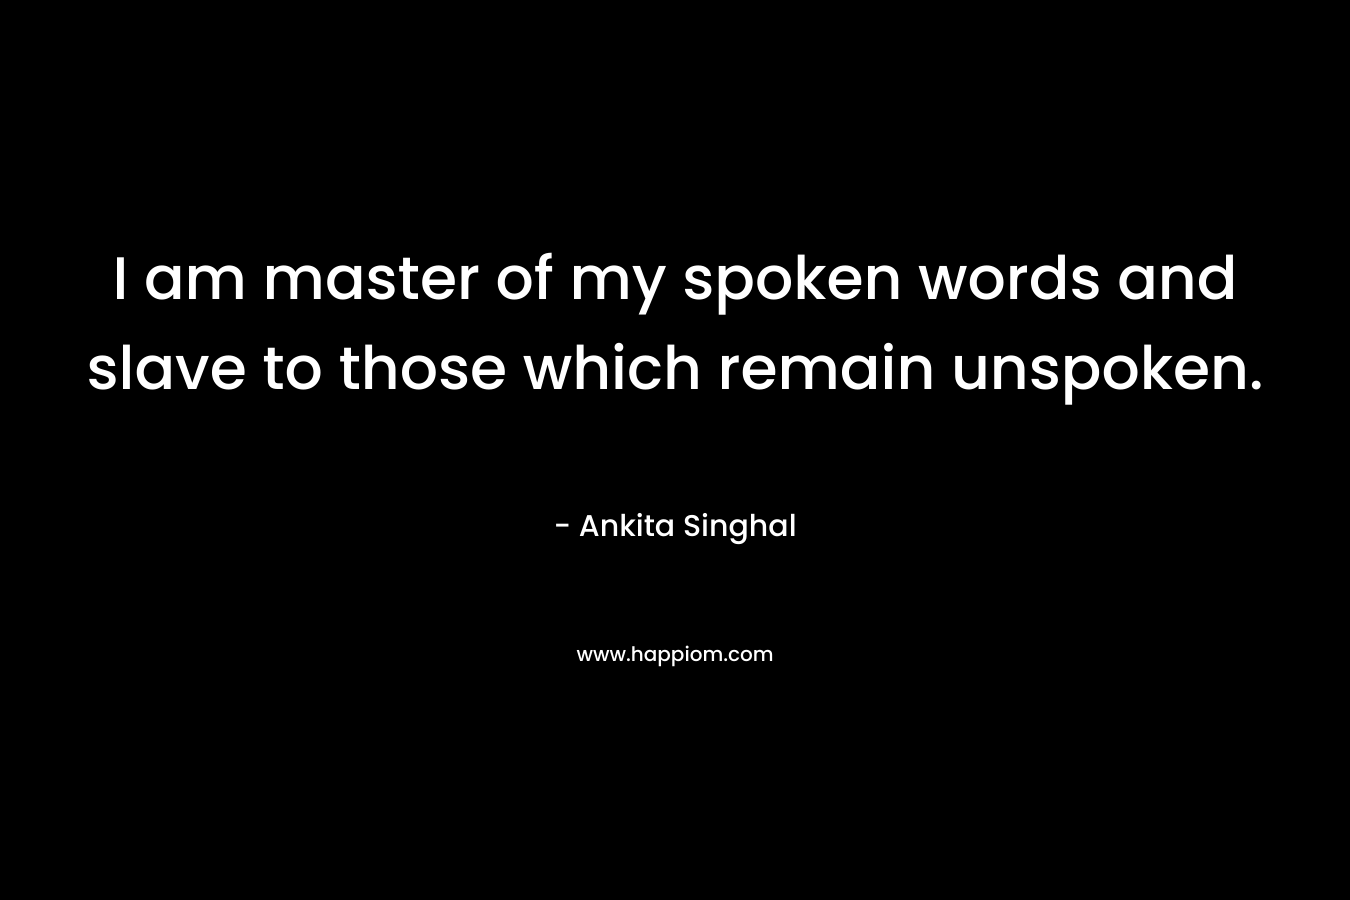 I am master of my spoken words and slave to those which remain unspoken.